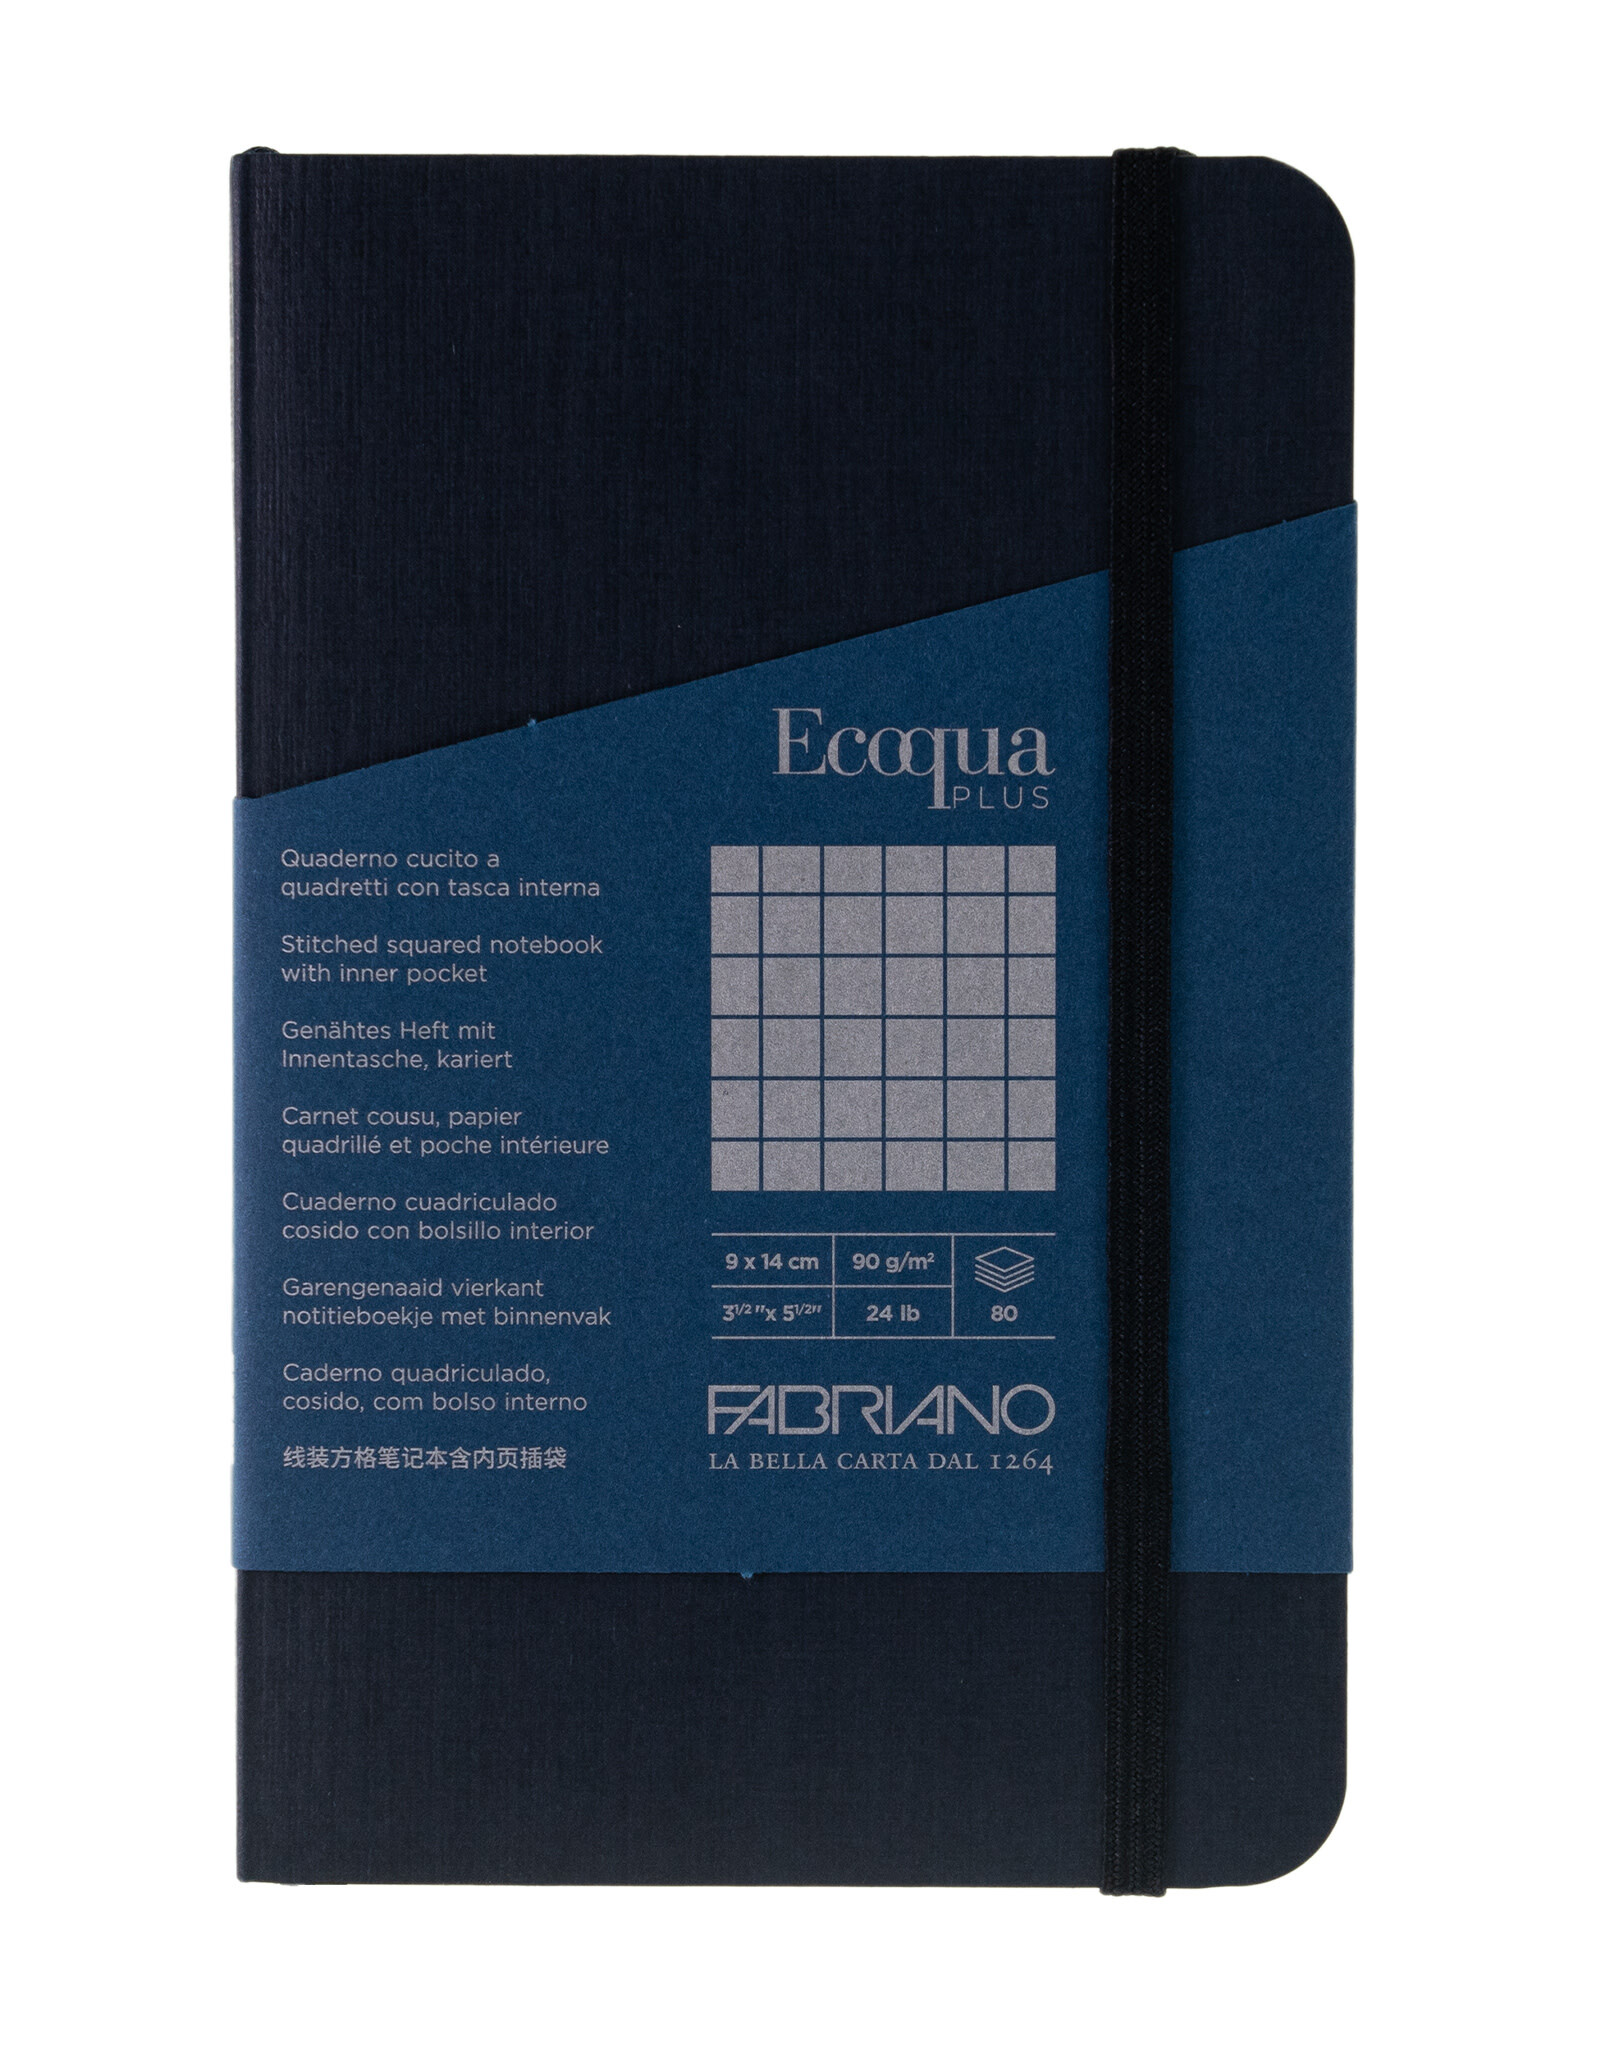 Ecoqua Plus Sewn Spine Notebook, Navy, 3.5” x 5.5”, Graphed